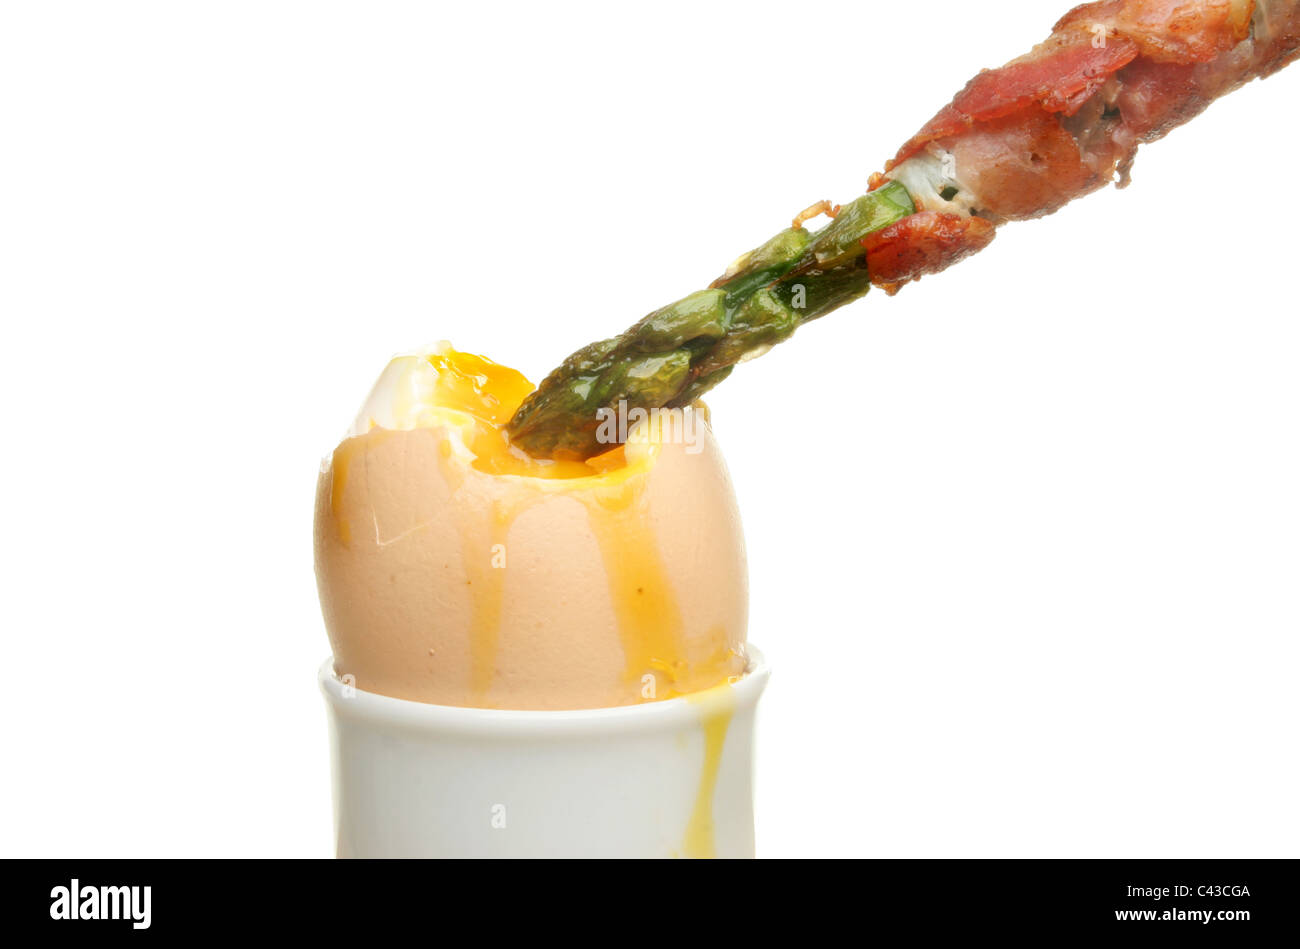 Pancetta wrapped asparagus spear dipped in the yolk of a soft boiled egg Stock Photo